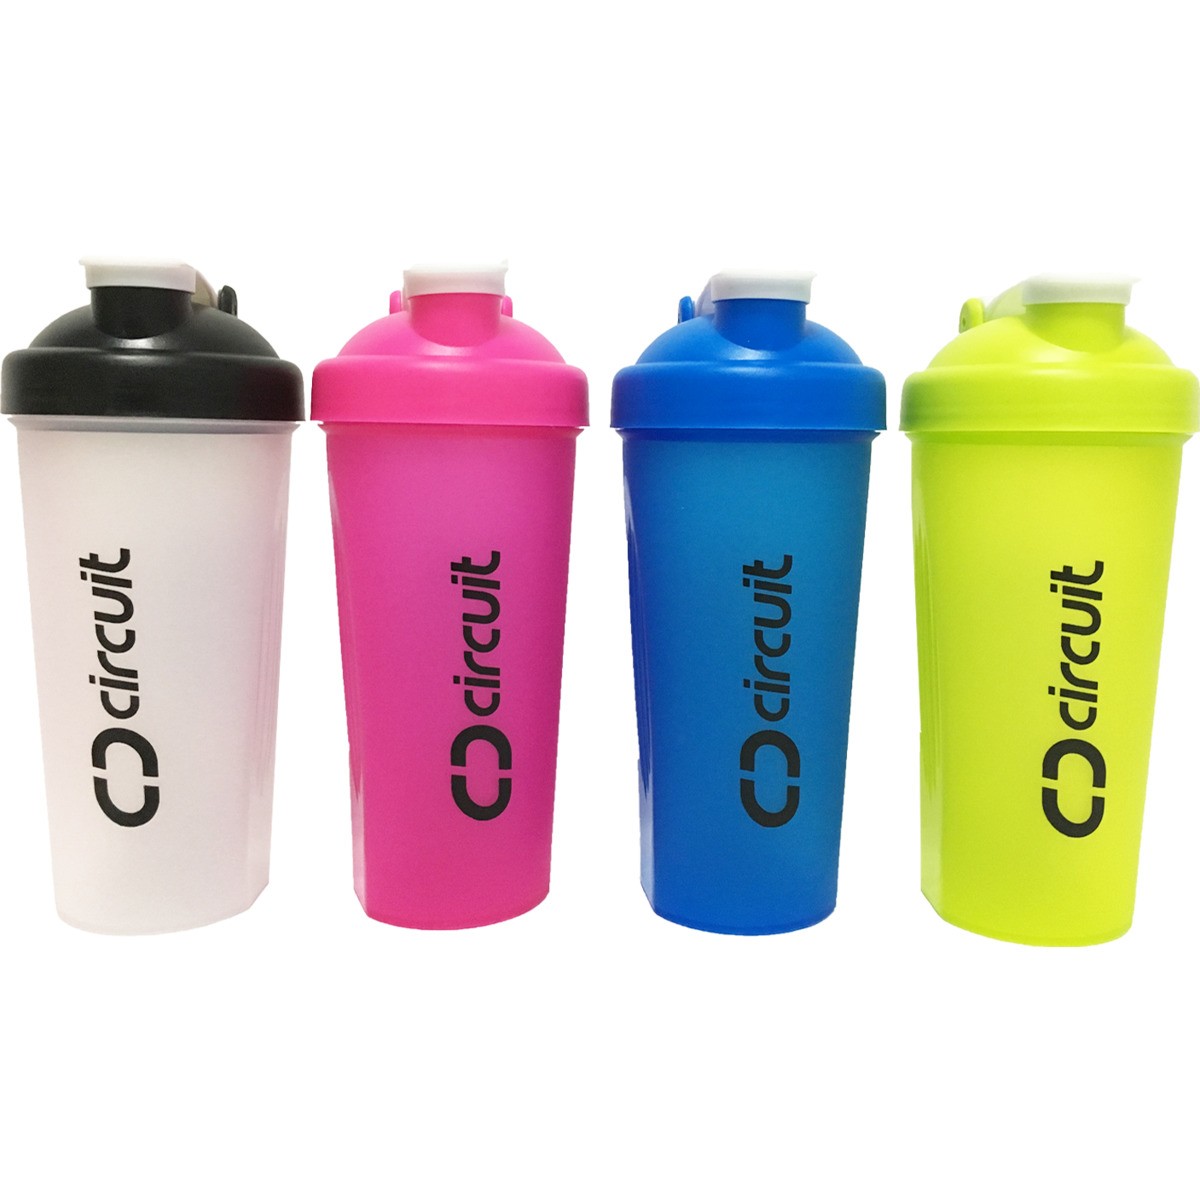 Protein Shaker Bottle: For The Serious One - Aik Designs